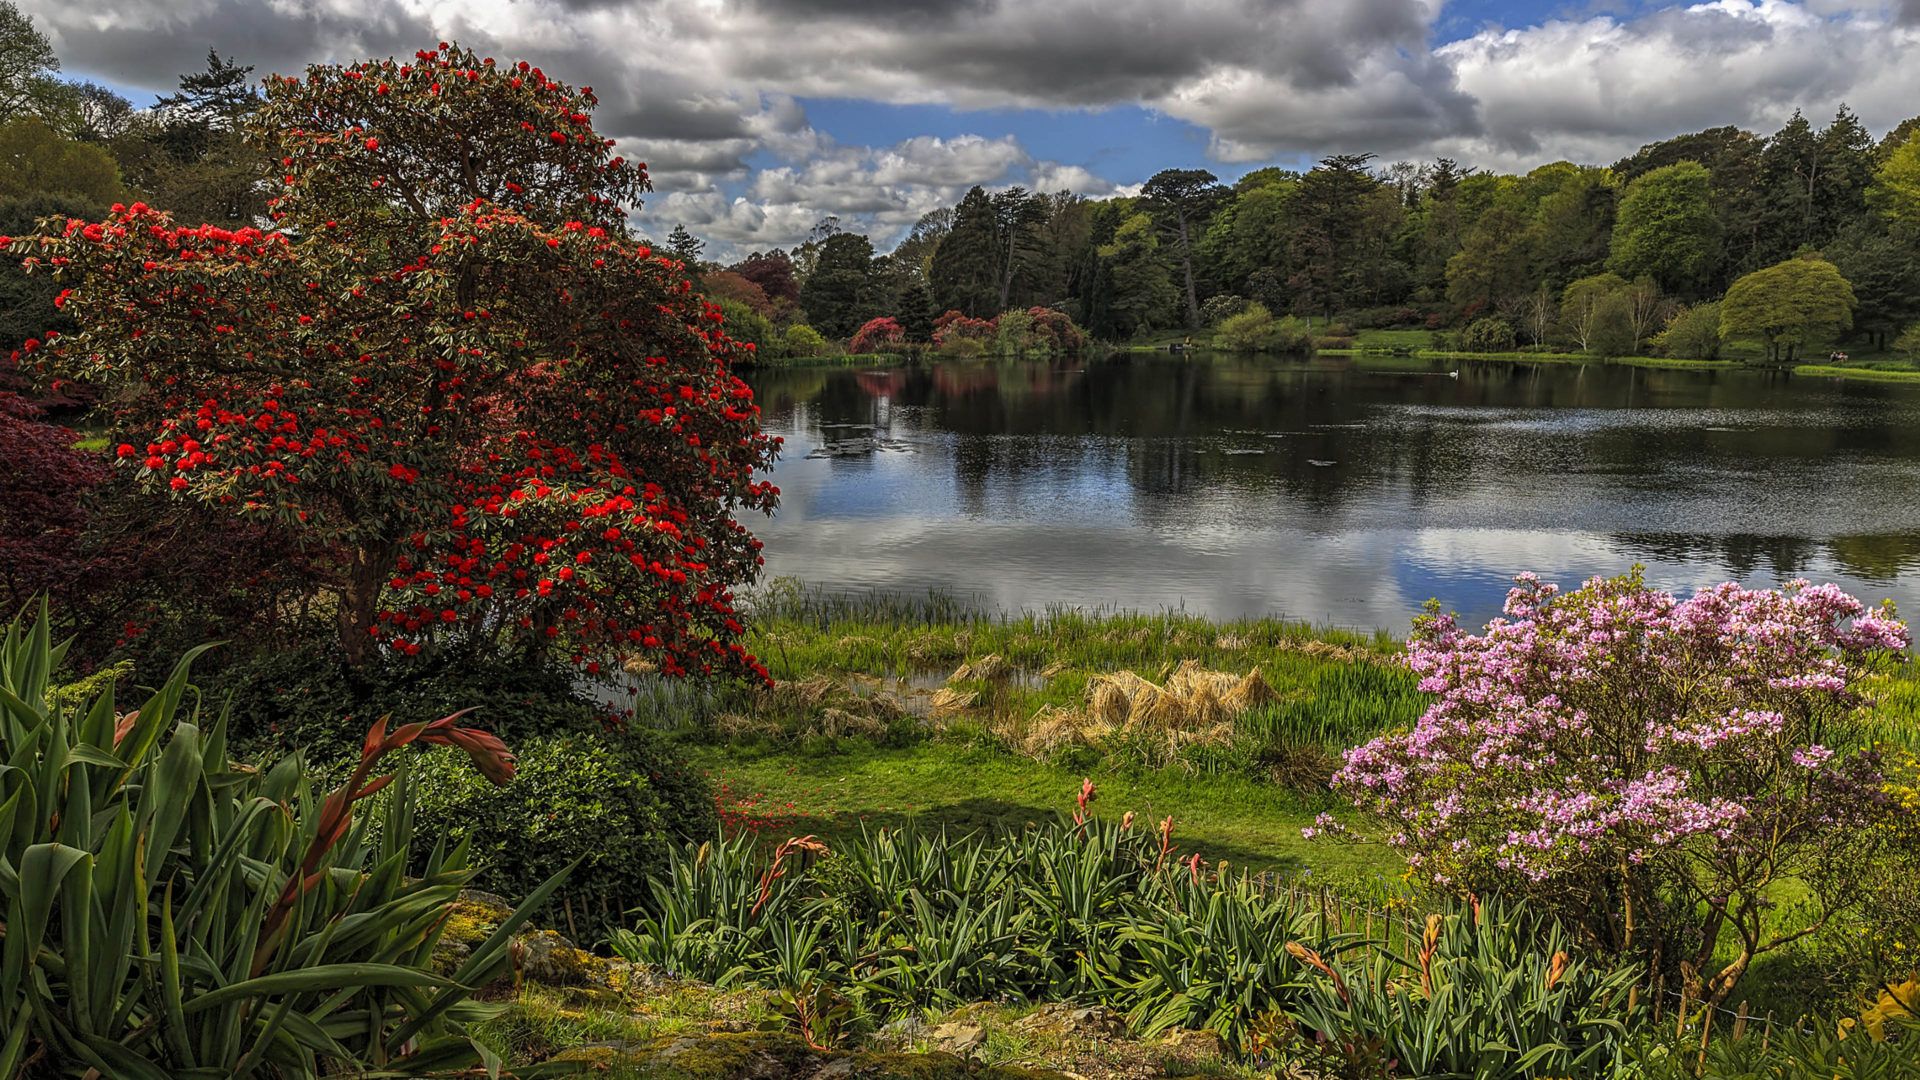 Spring At Mount Stewart Lake In County Down Northern Ireland Desktop HD Wallpaper For Pc Tablet And Mobile Download, Wallpaper13.com